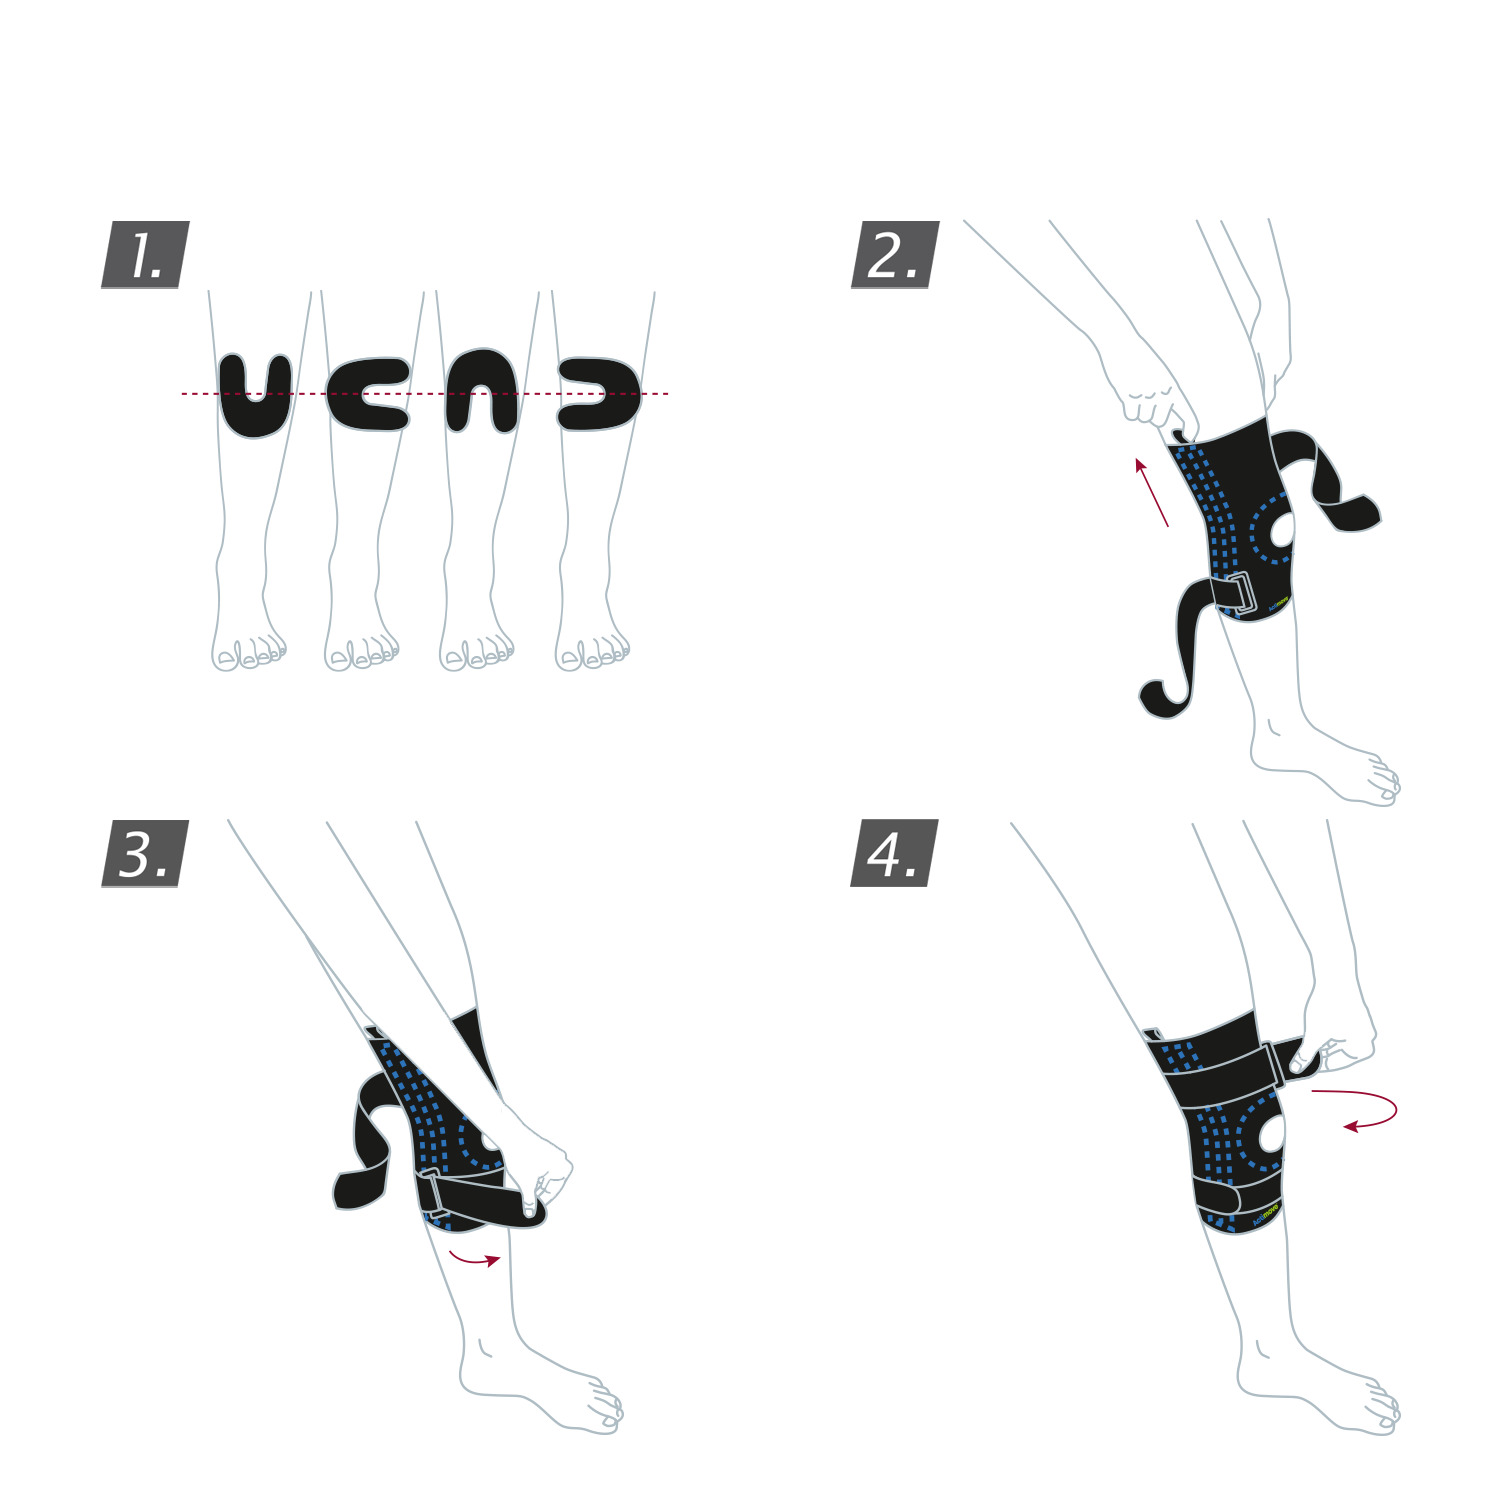 Actimove Sports Edition Knee Stabilizer Instructions